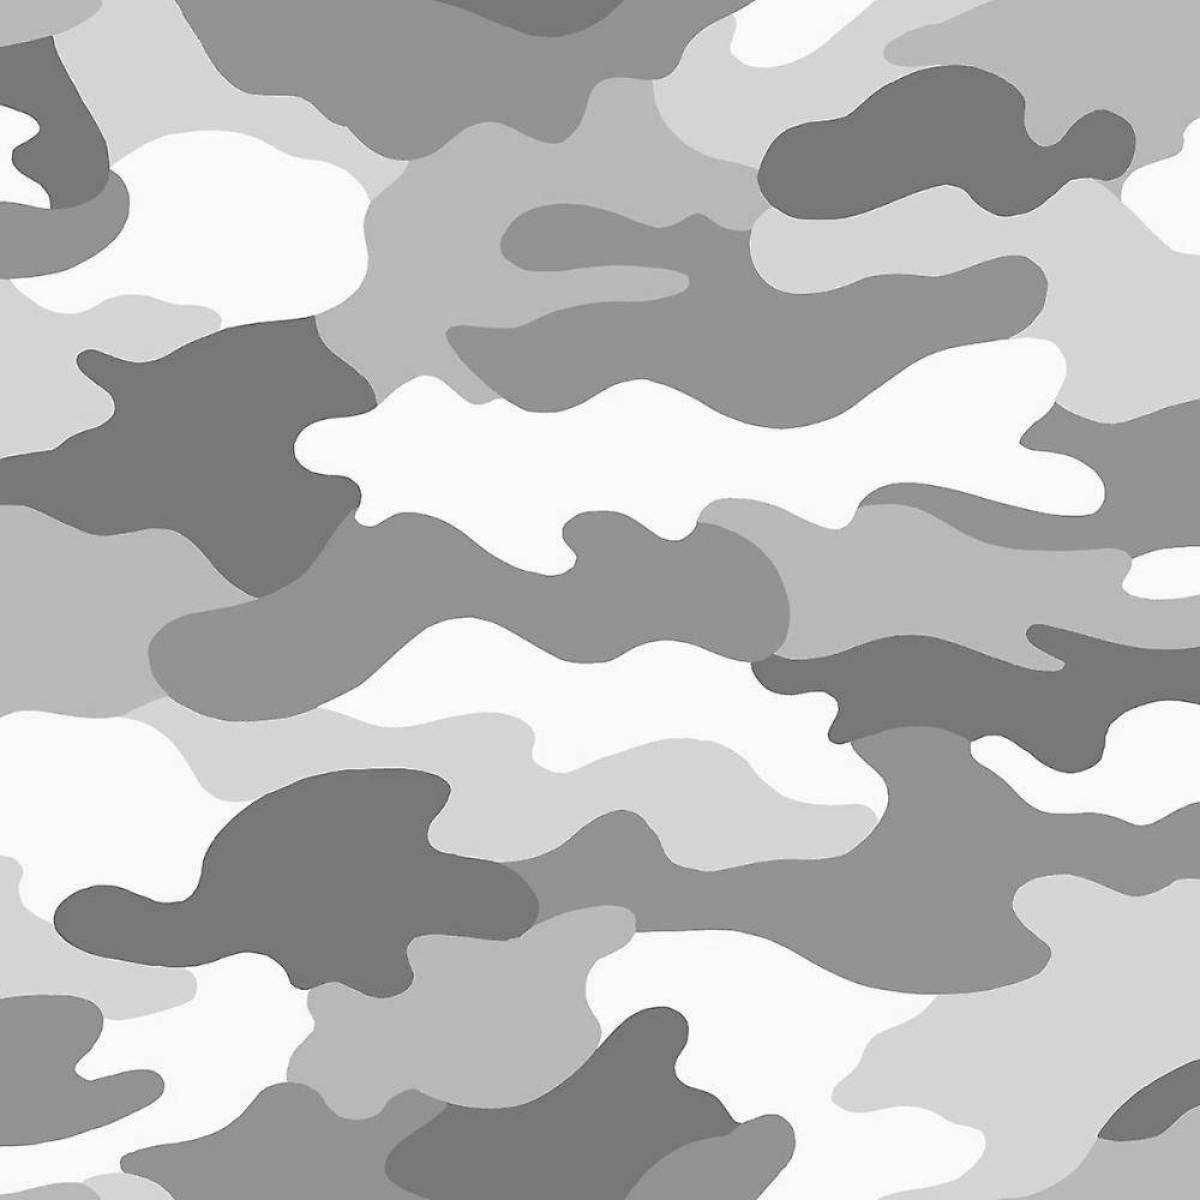 Royal military coloring page background